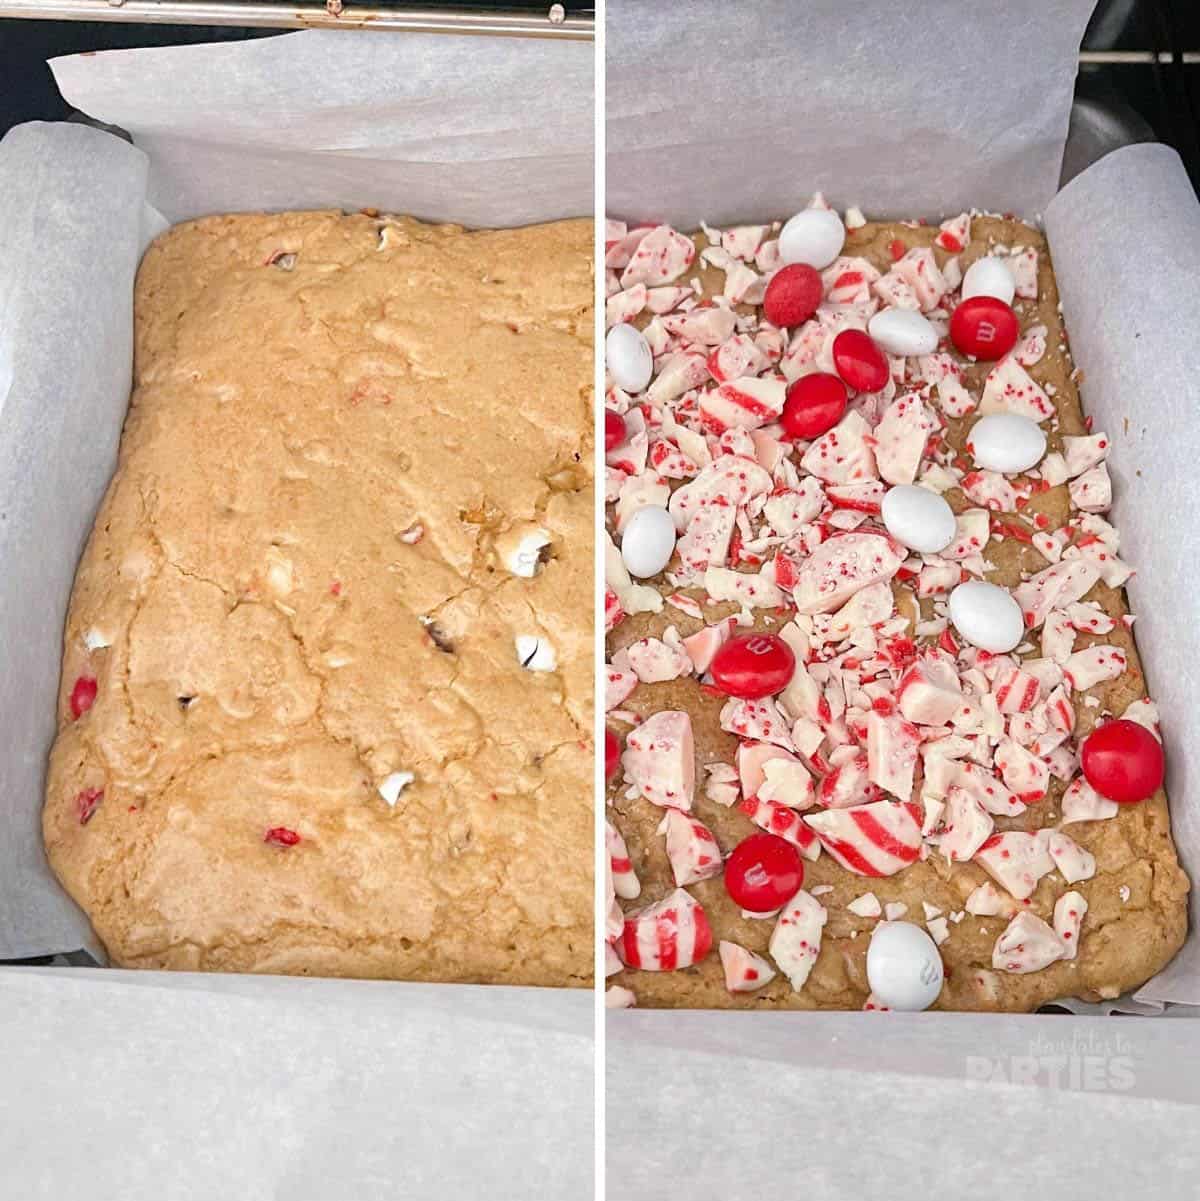 Blondies baked and candy added on top.